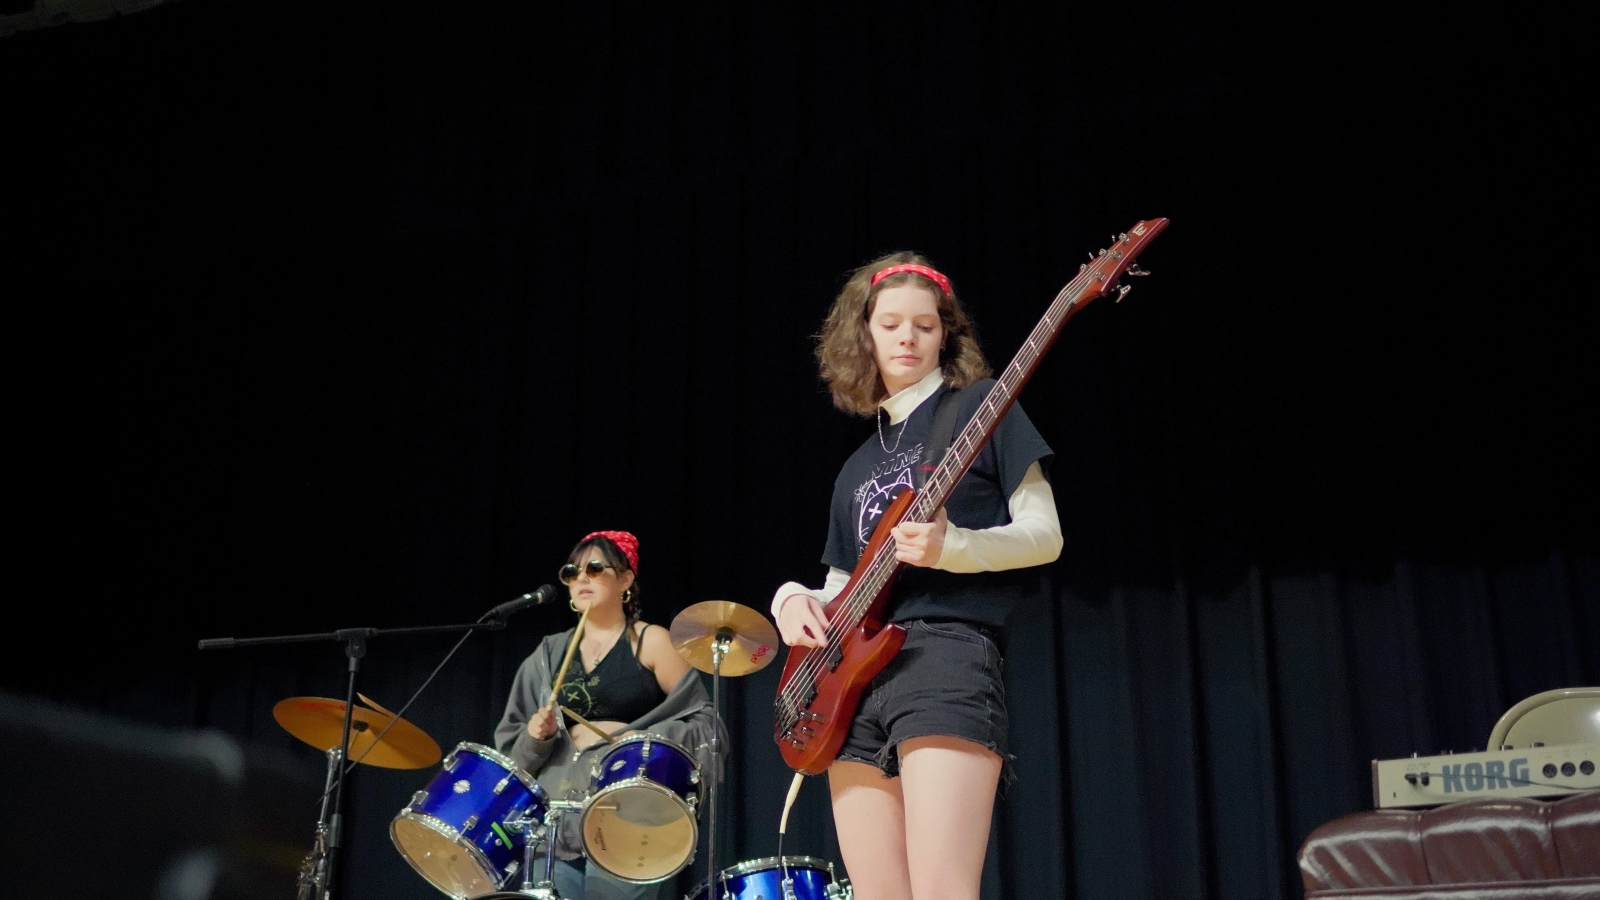 A bass player and drummer perform on stage at Queen City Rock Camp